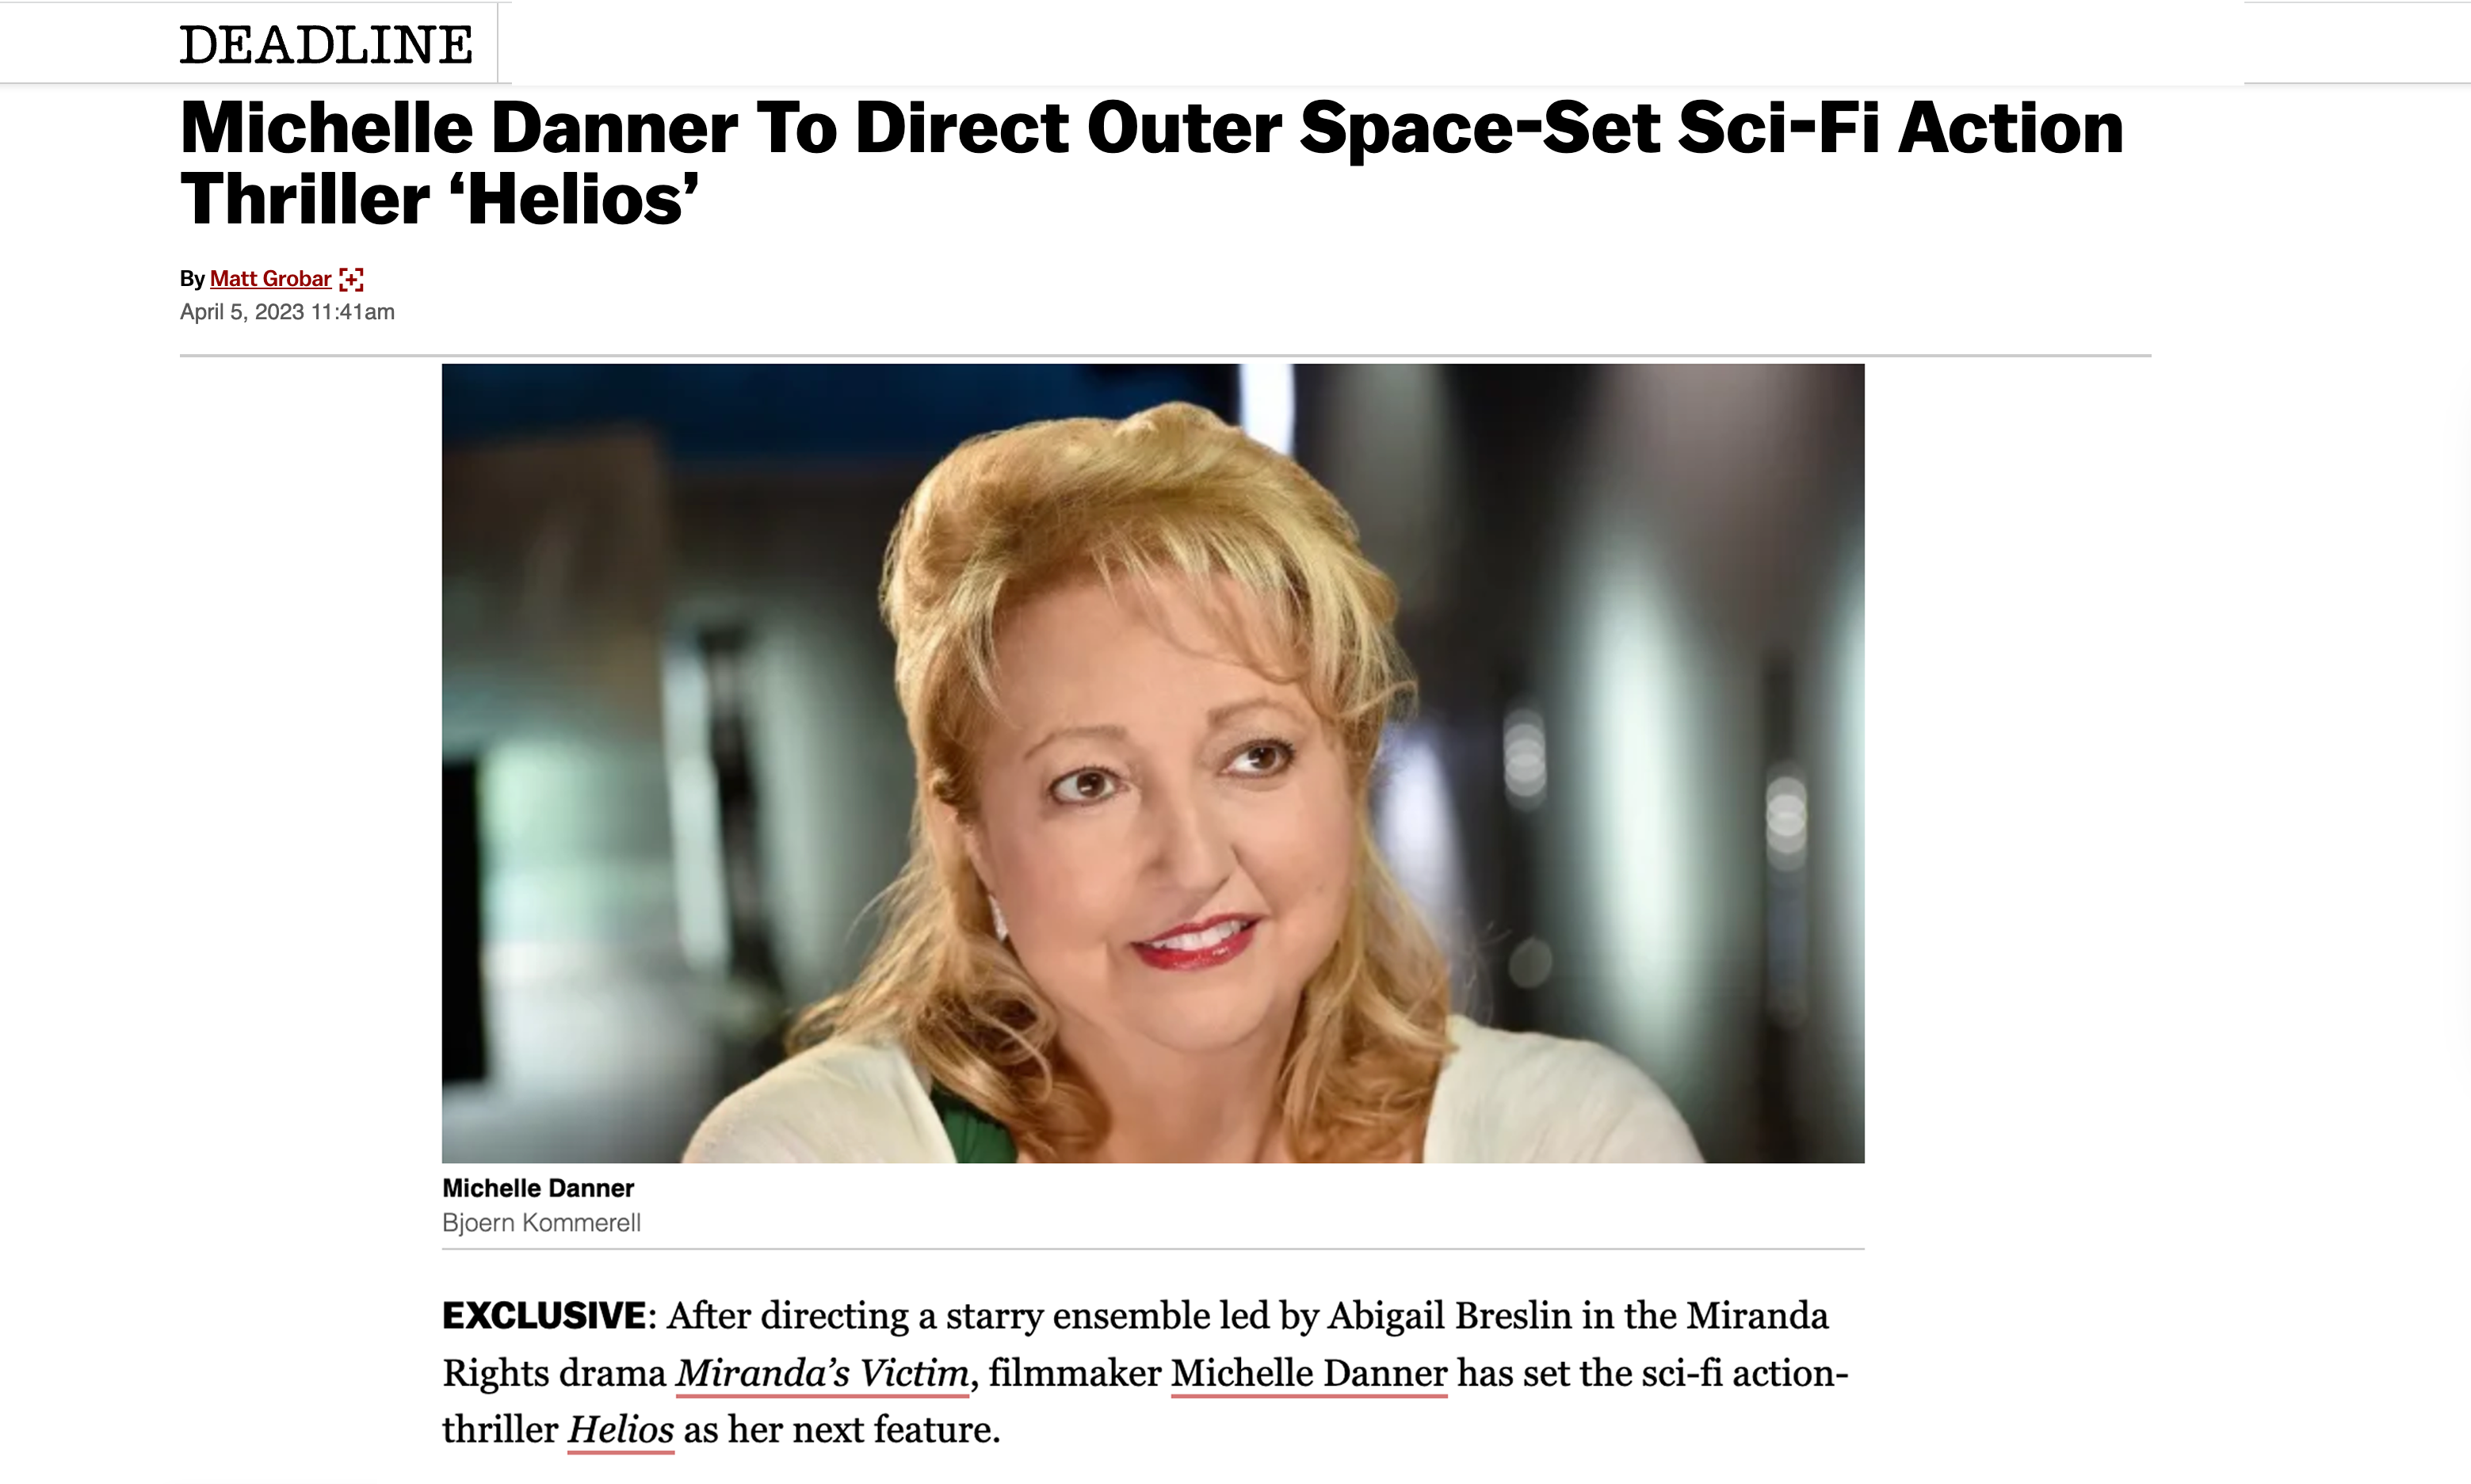 Michelle Danner To Direct Outer Space-Set Sci-Fi Action Thriller ‘Helios’